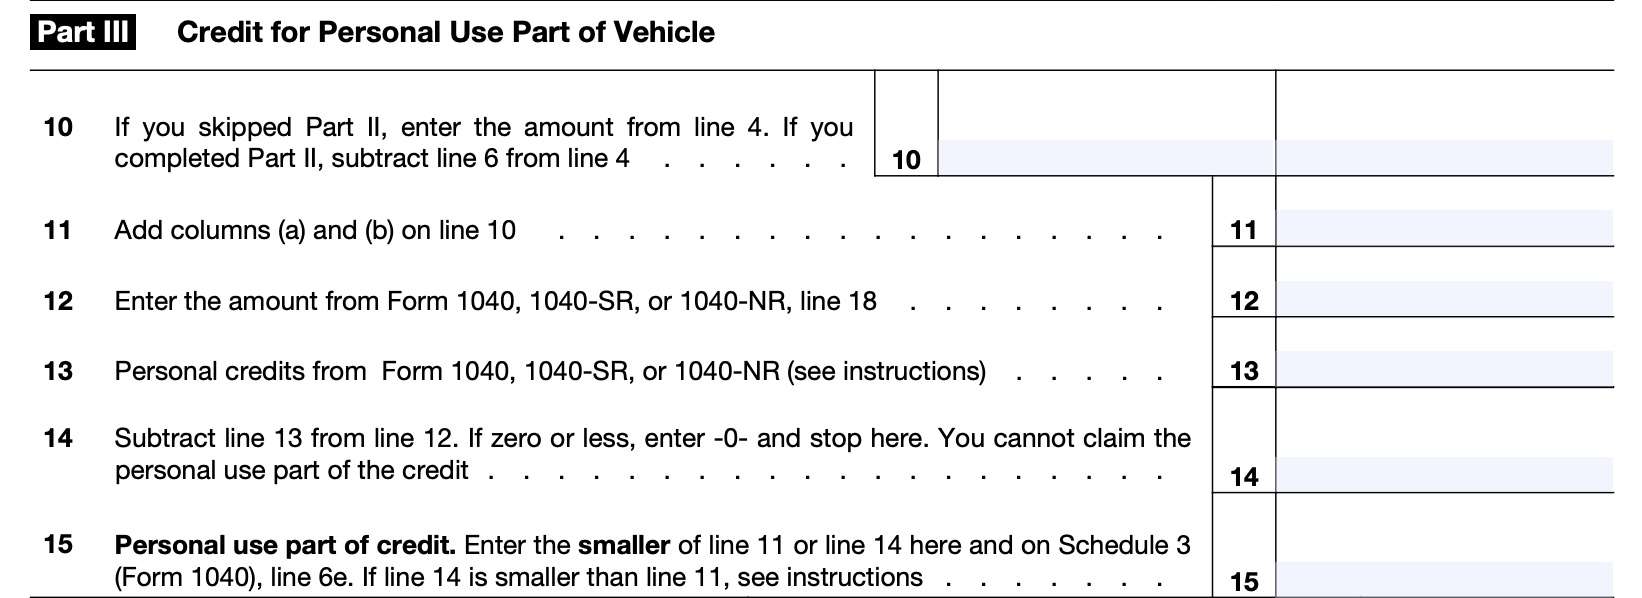 irs form 8910 part iii, credit for personal use part of vehicle